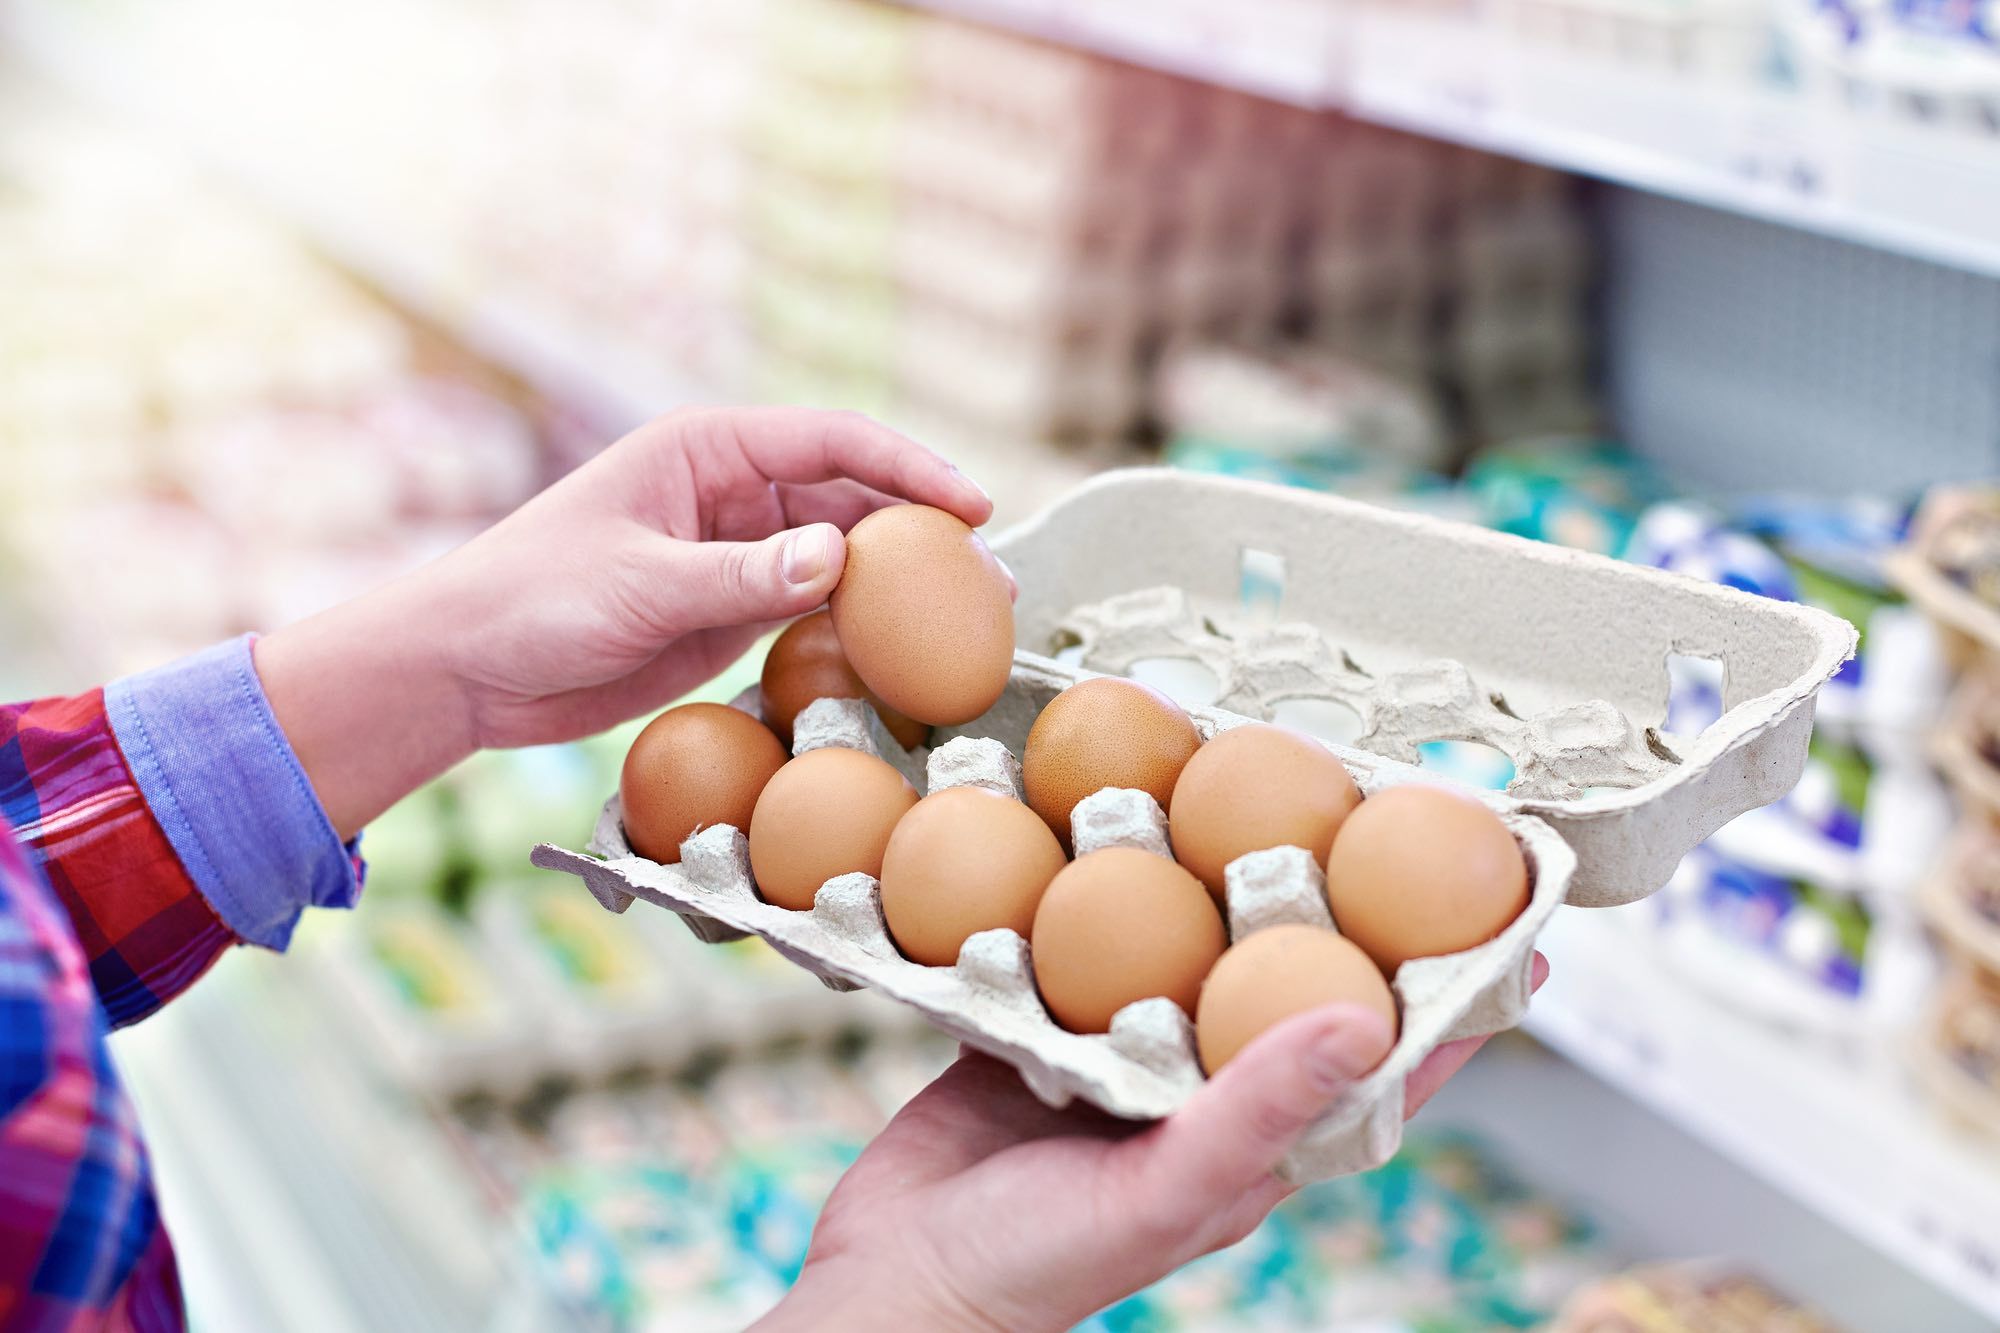 holding eggs looking at prices